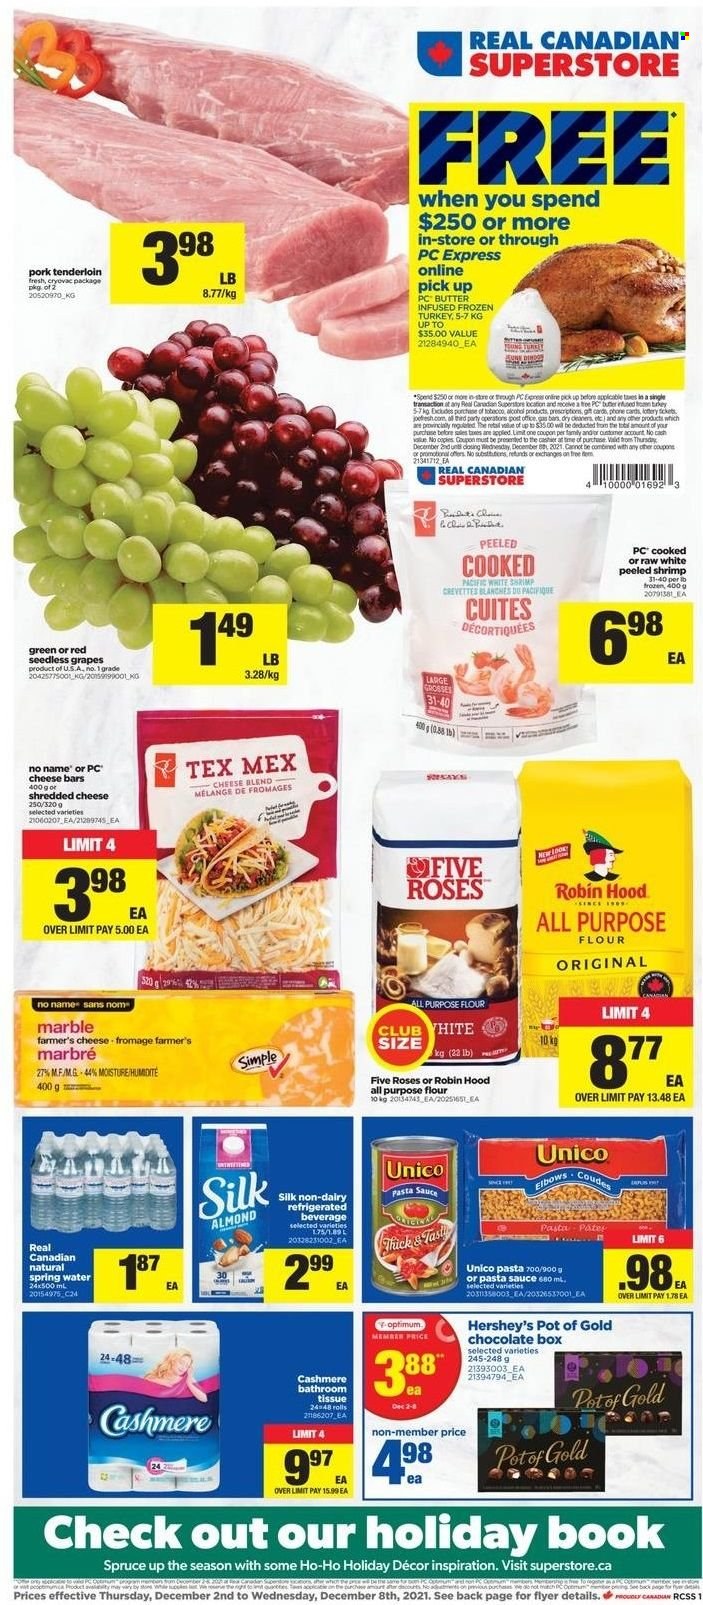 thumbnail - Real Canadian Superstore Flyer - December 02, 2021 - December 08, 2021 - Sales products - grapes, seedless grapes, No Name, pasta sauce, shredded cheese, Silk, butter, Hershey's, chocolate, all purpose flour, flour, spring water, alcohol, whole turkey, turkey, pork meat, pork tenderloin, bath tissue, pot, book, Optimum, phone. Page 1.